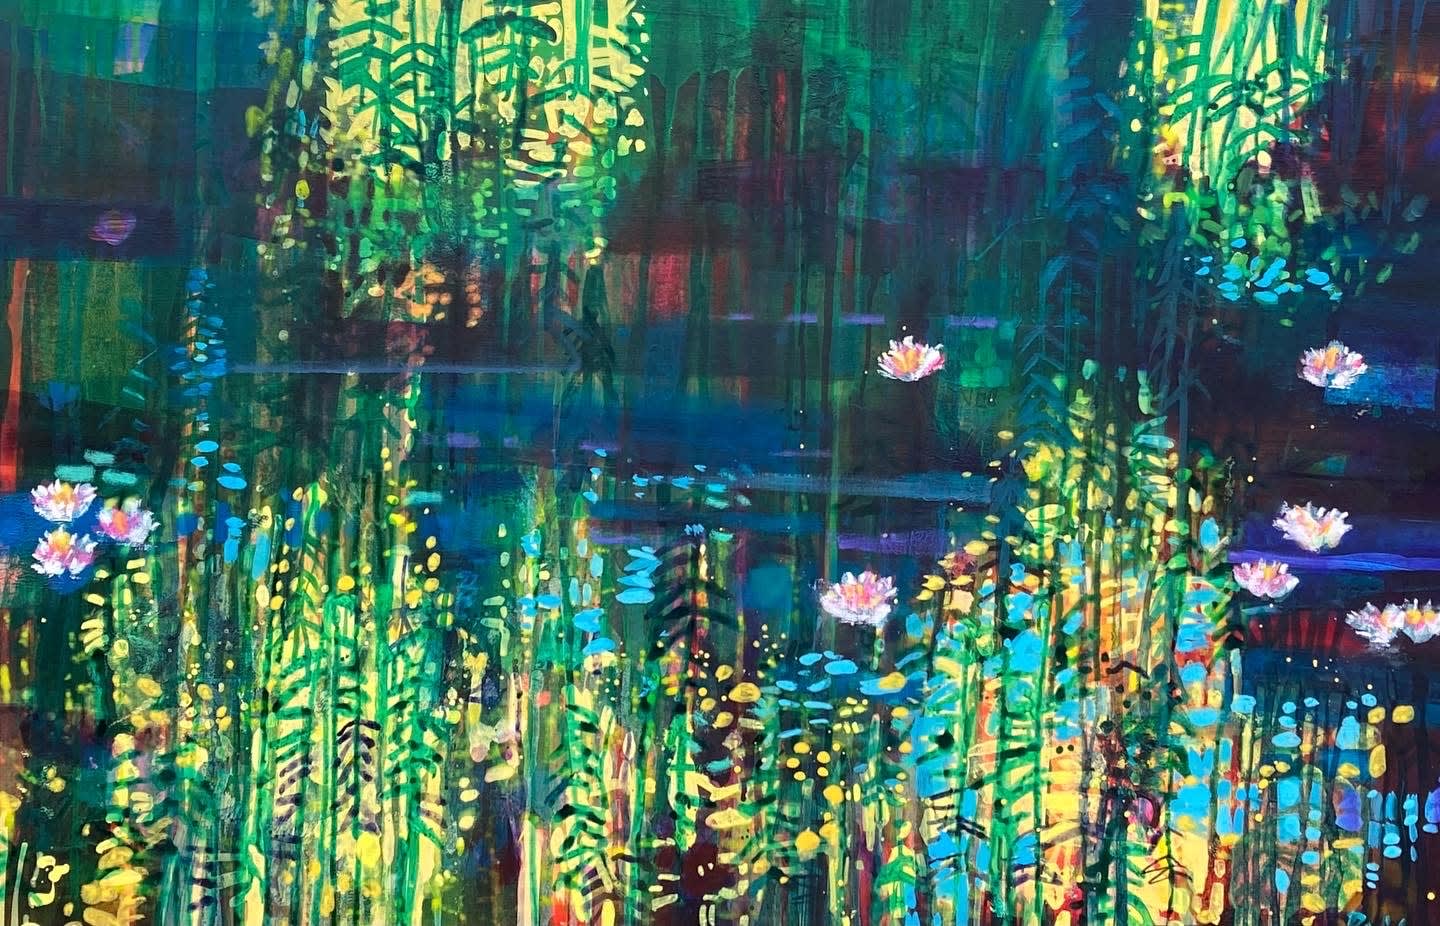 Francis Boag, Sunlight and Reflections, Giverny